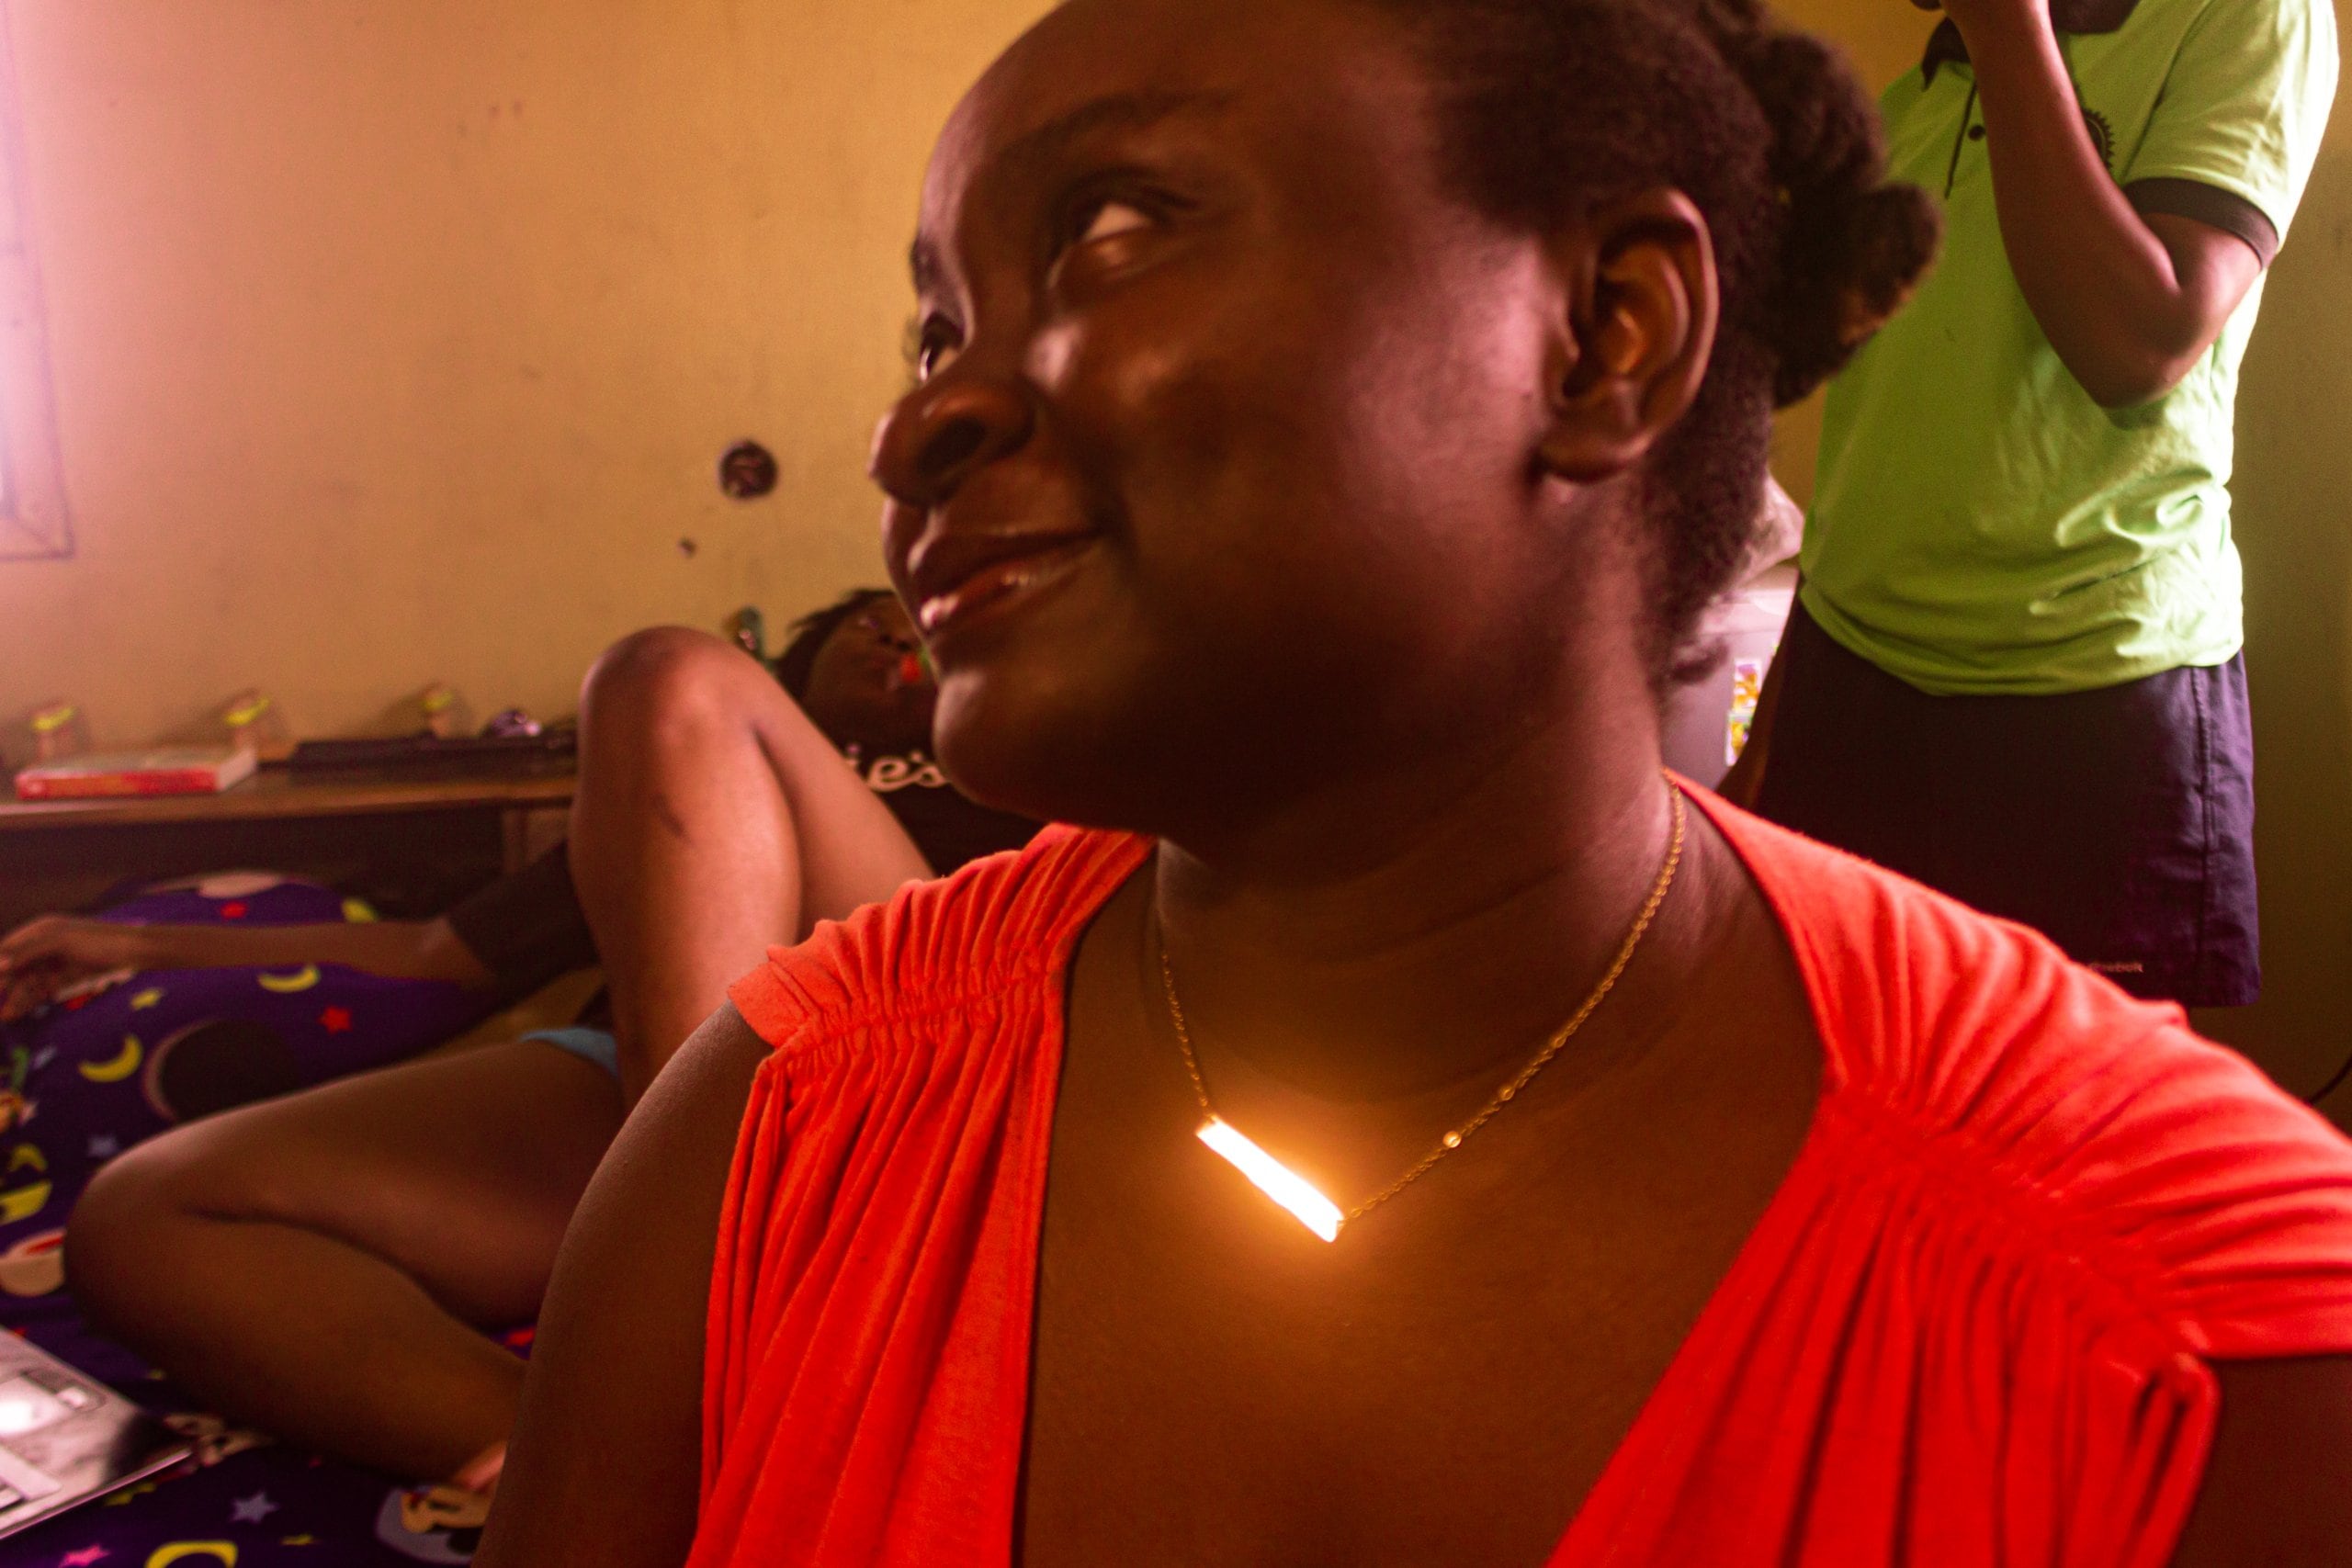 Ife wearing a gold necklace and a red dress, family members standing behind her.